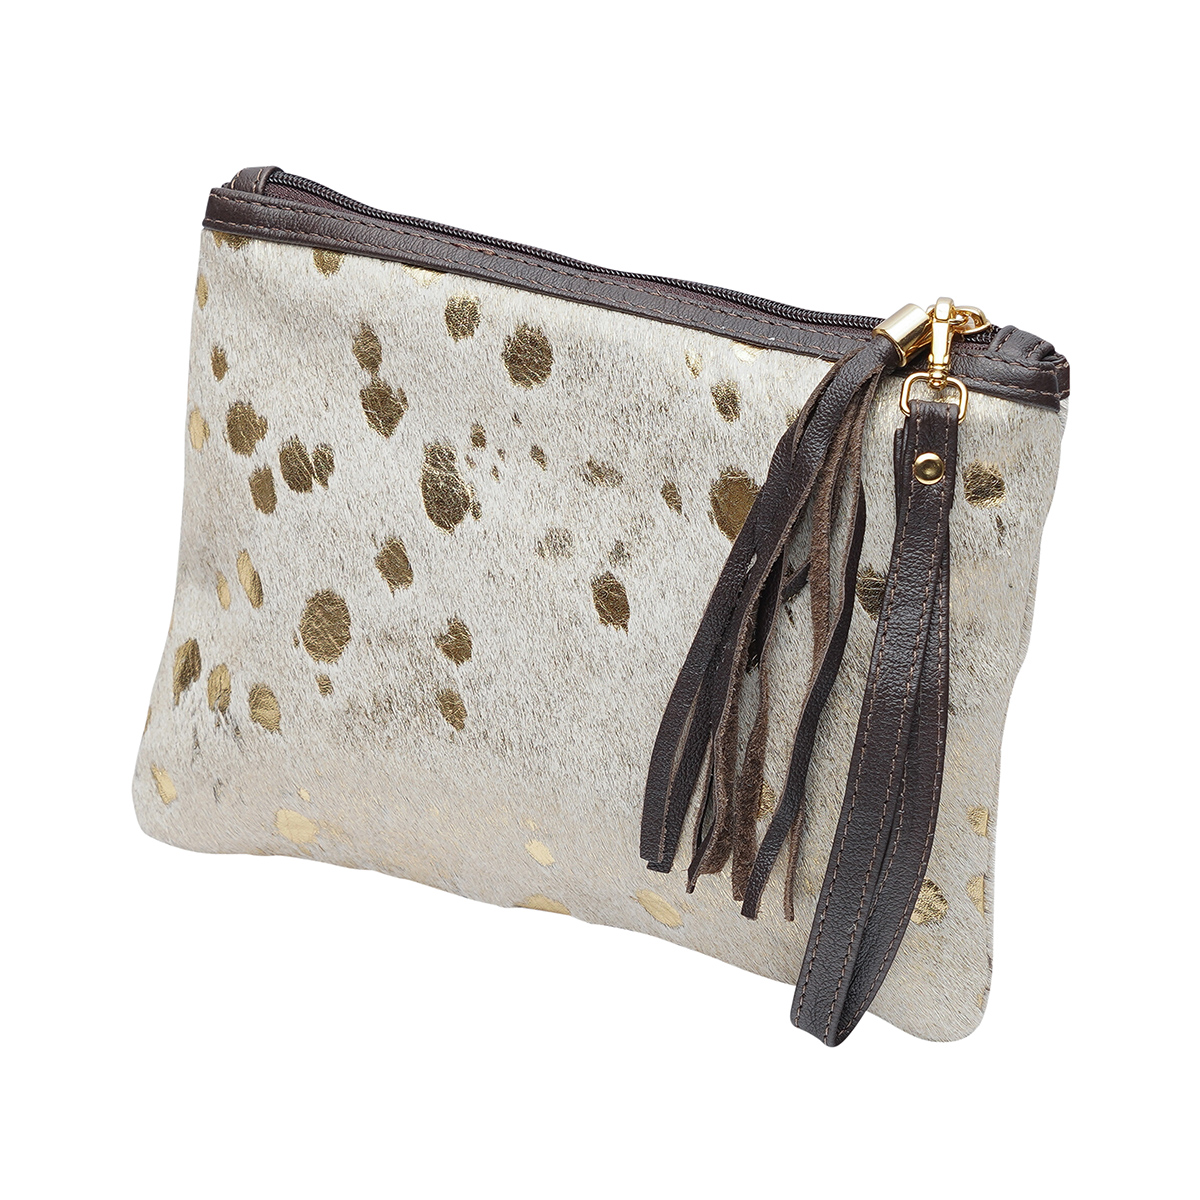 Acid Washed Clutches